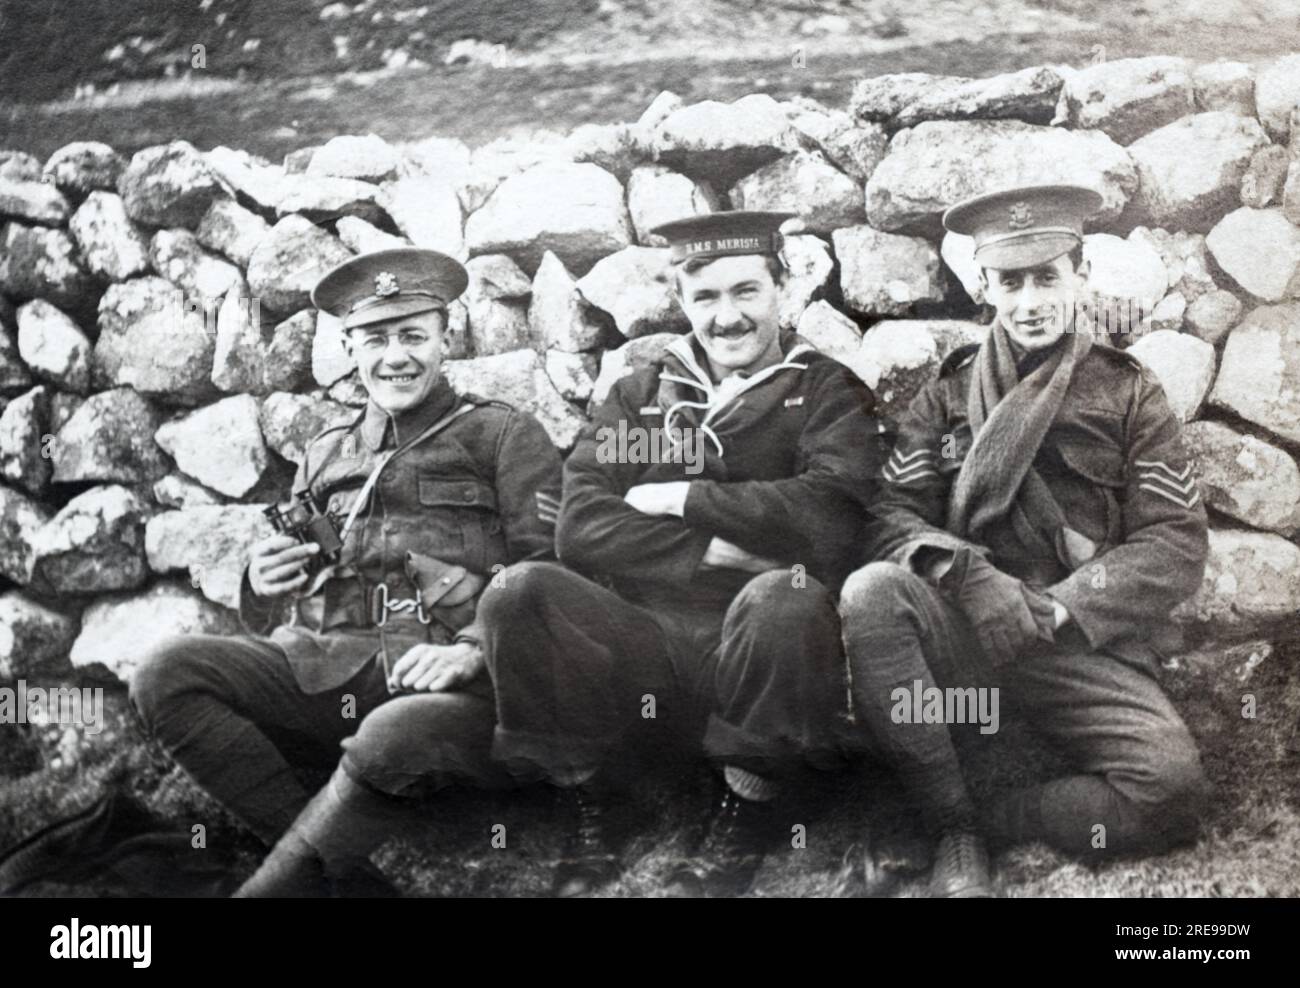 Two sergeants of the Welsh Regiment with a Royal Navy Reserve sailor of HMS Merisia on Ramsey Island, Wales, 1915. Named (left to right): Gussi, Sidney Mortimer, and Gwyn Thomas. Stock Photo